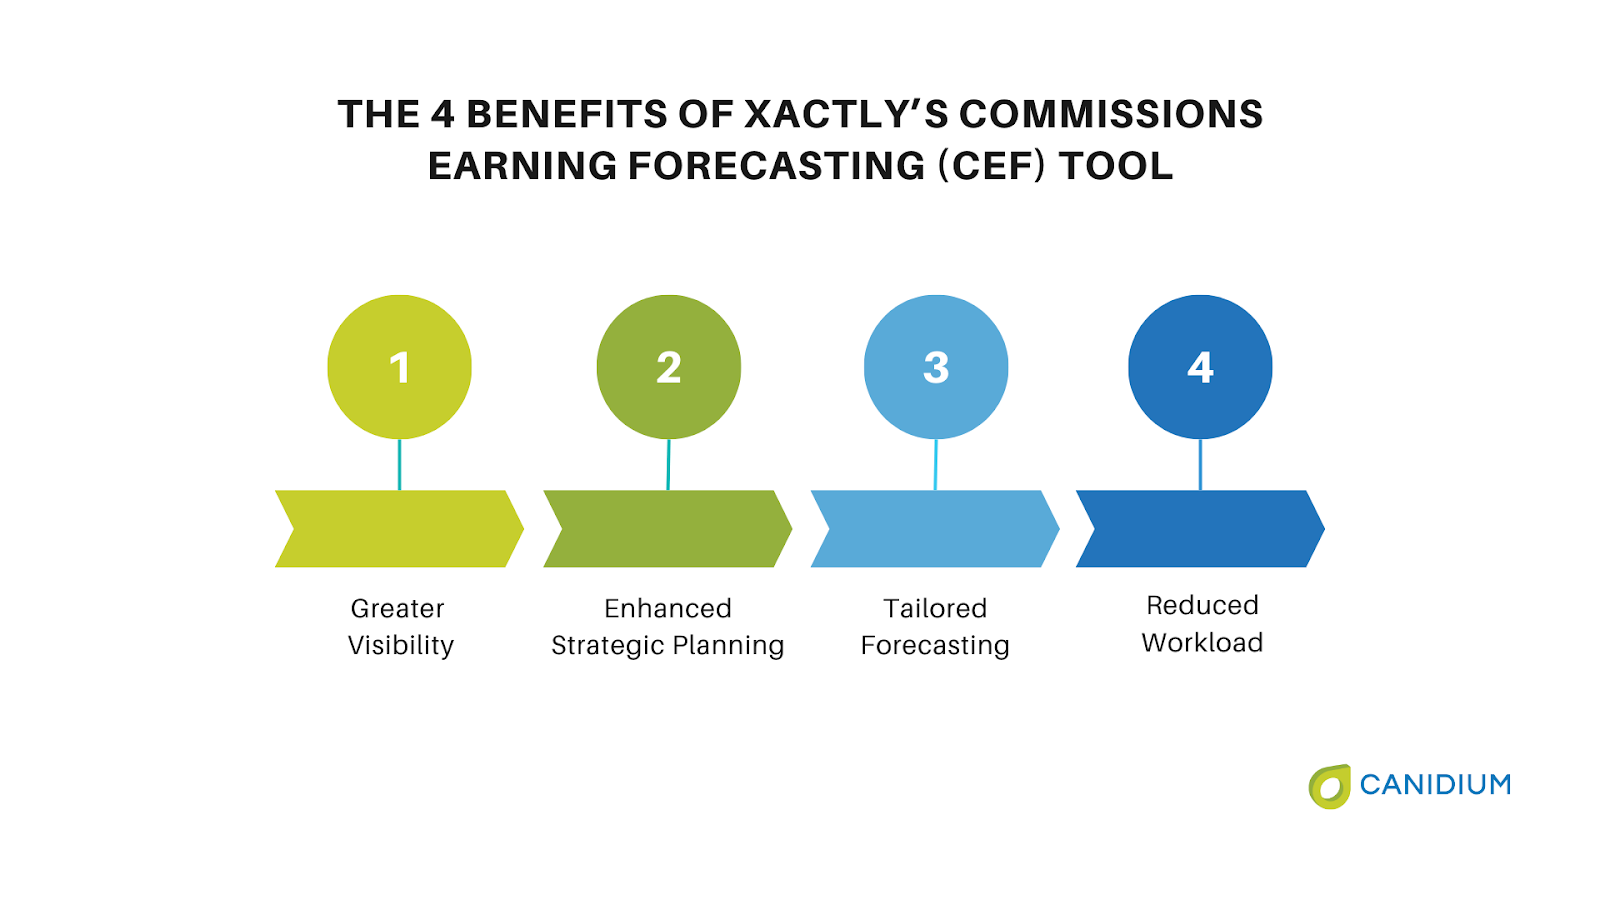 The 4 benefits of Xactly's commissions earning forecasting (CEF) tool